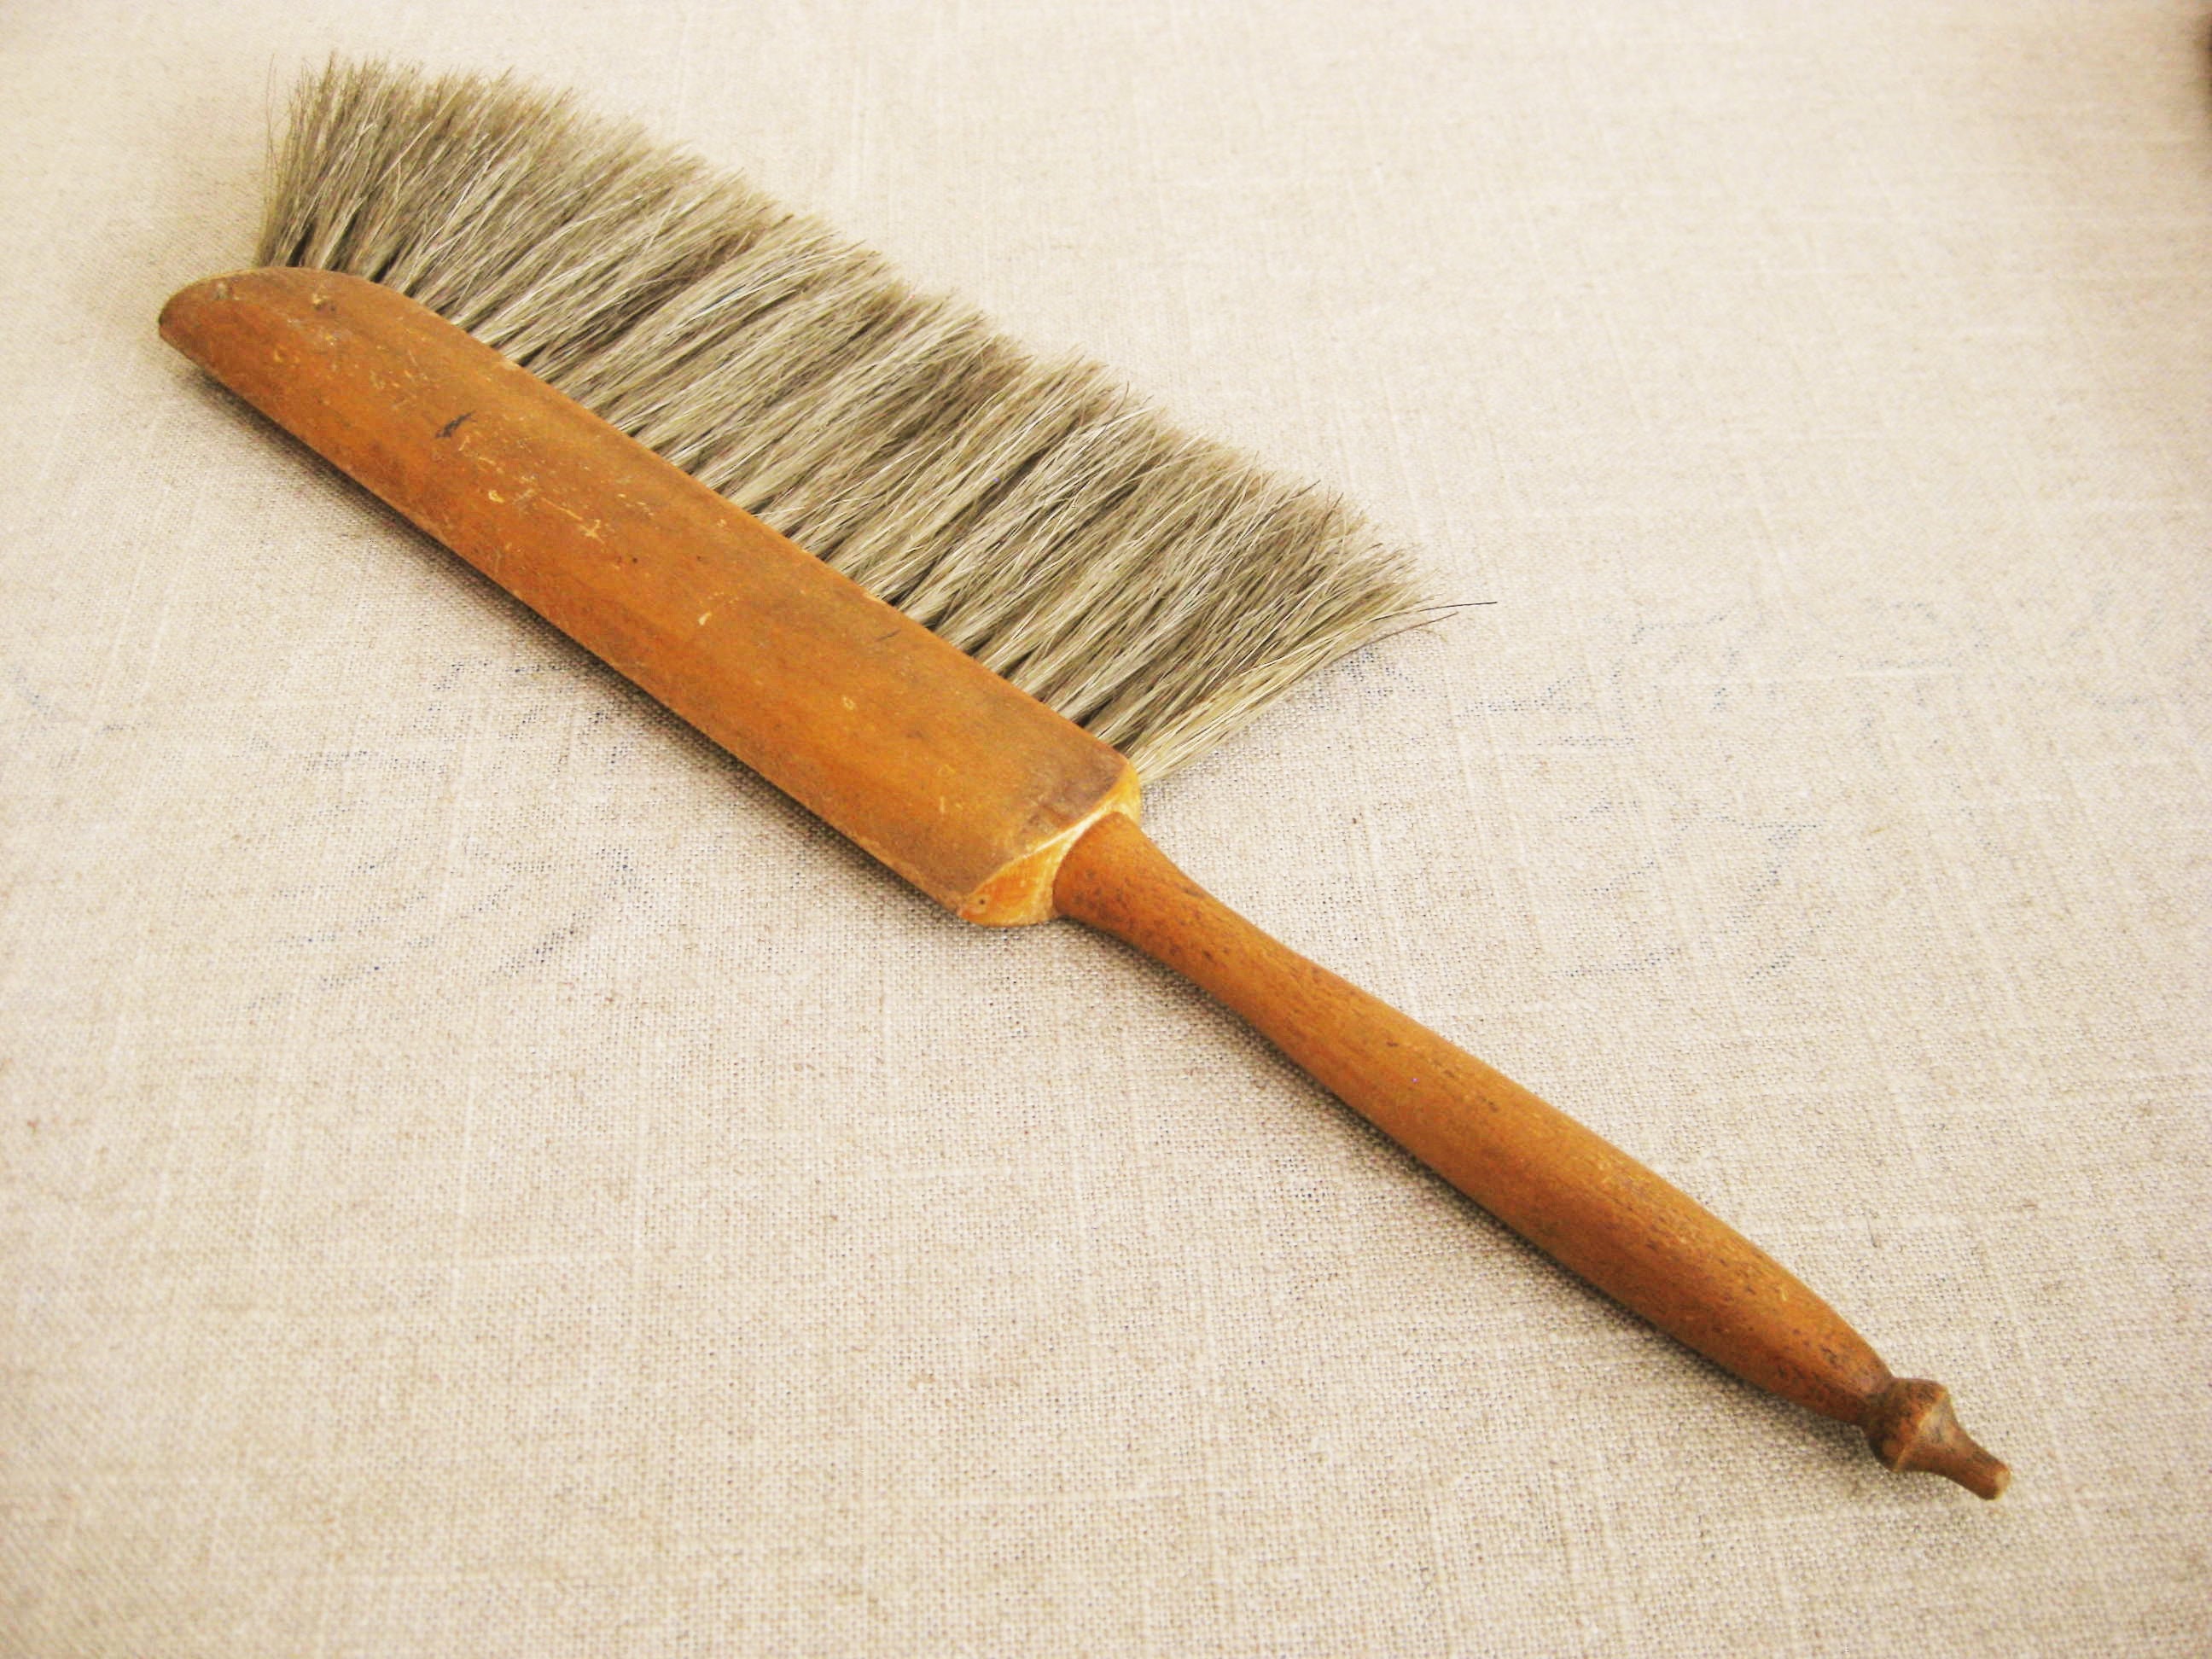 Vintage Desk Brush, Dietzgen Drafting Sweeper, Antique Architects Tools